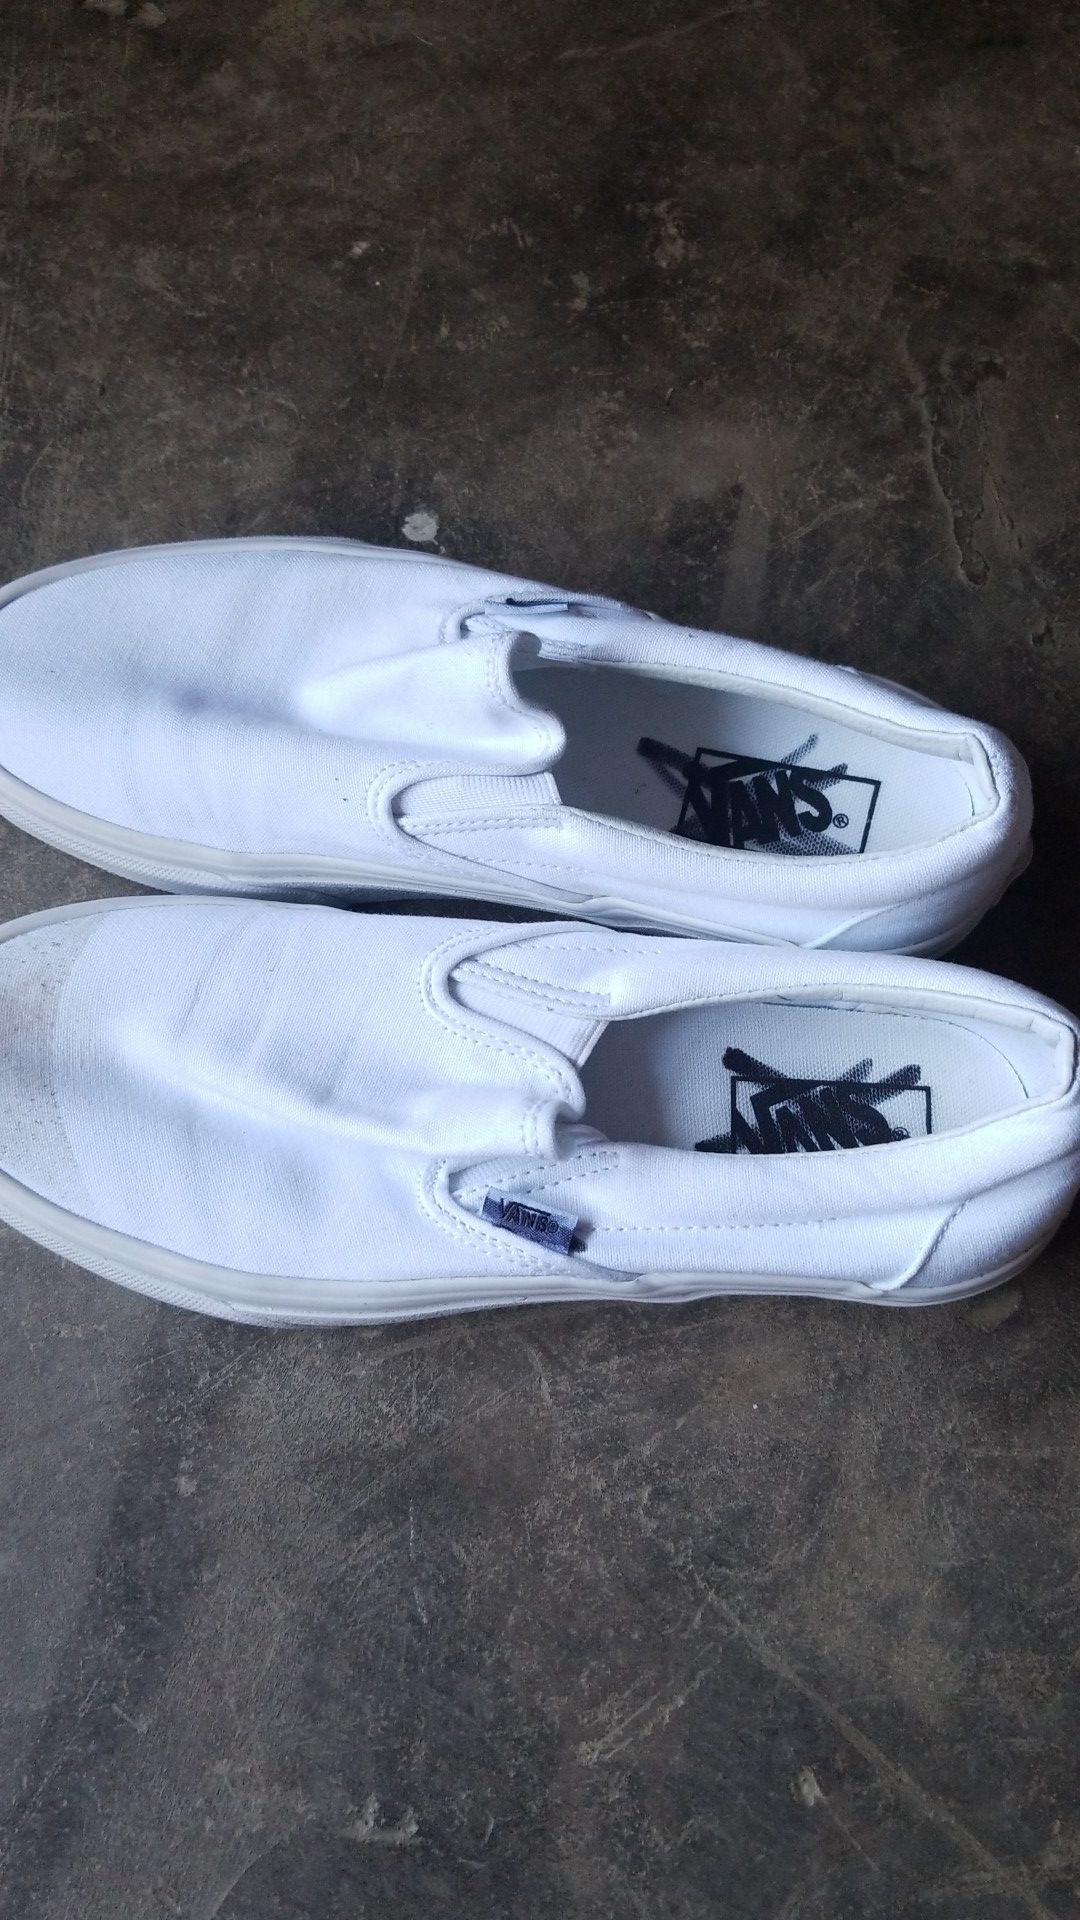 Vans Slip-ons! Womens-9.5, Mens-8.0. Great Condition.